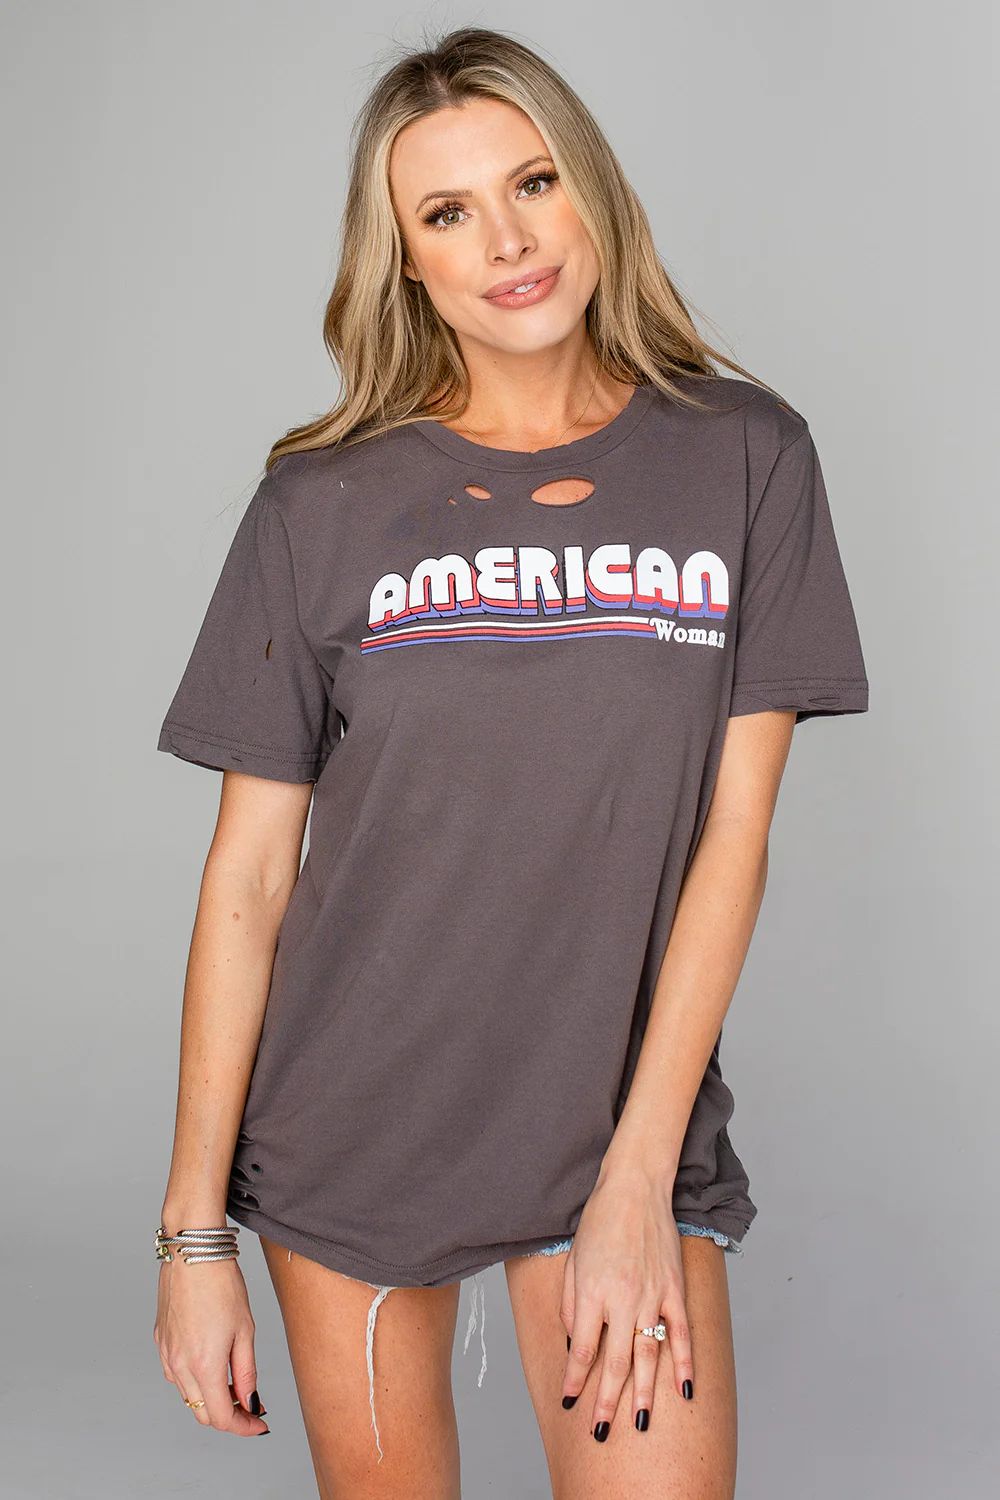 Russell Distressed Graphic Tee - American Woman | BuddyLove